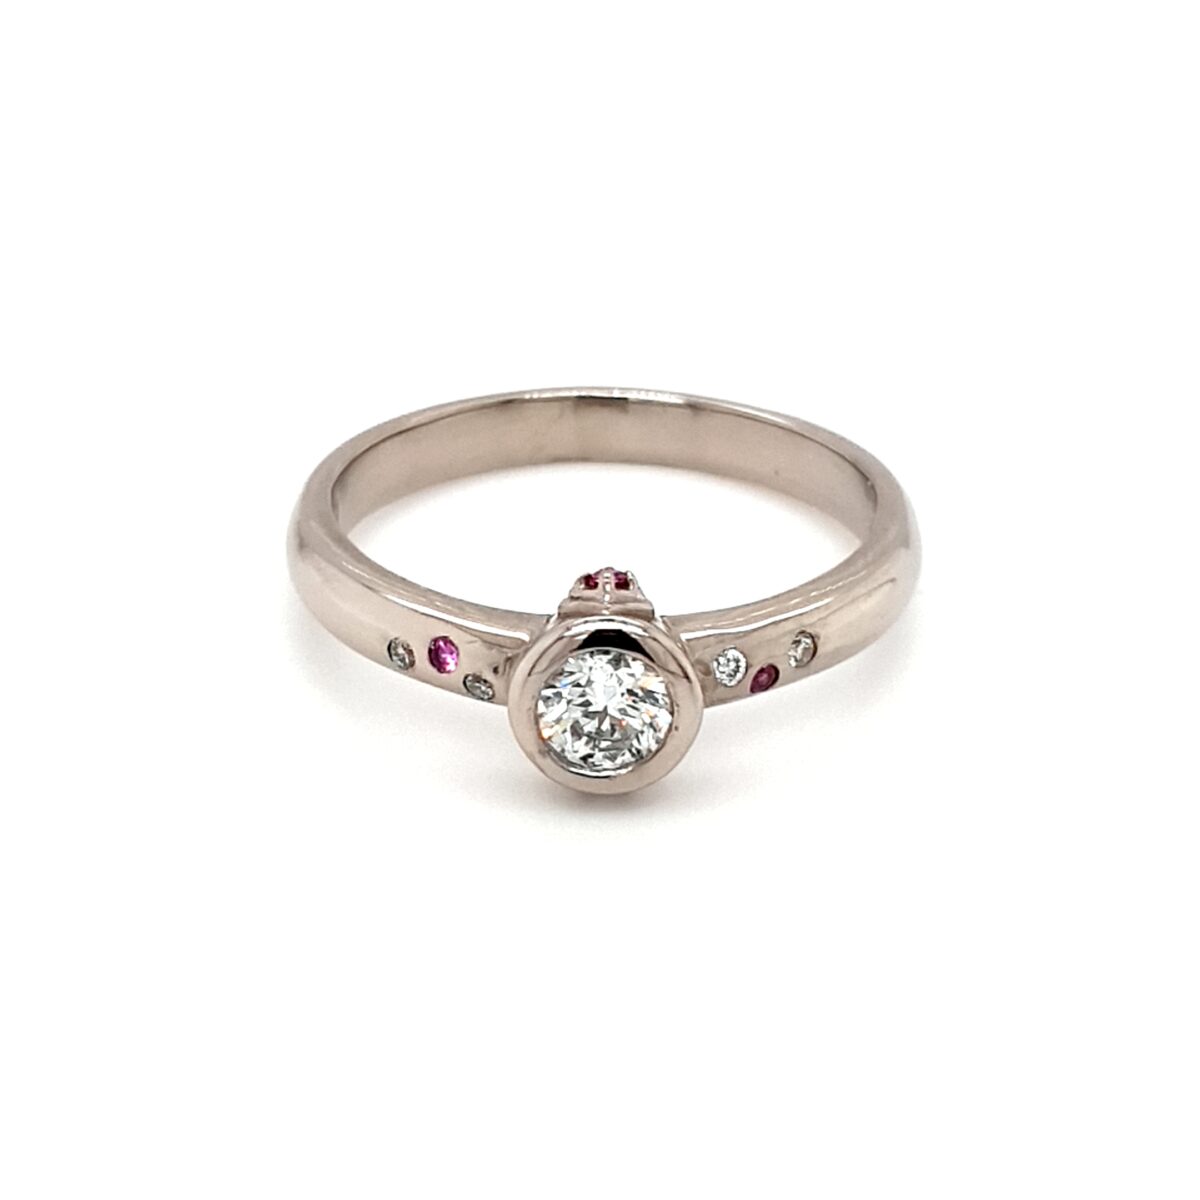 Leon Bakers 18K White Gold Diamond and Pink Sapphire Engagement Ring_0